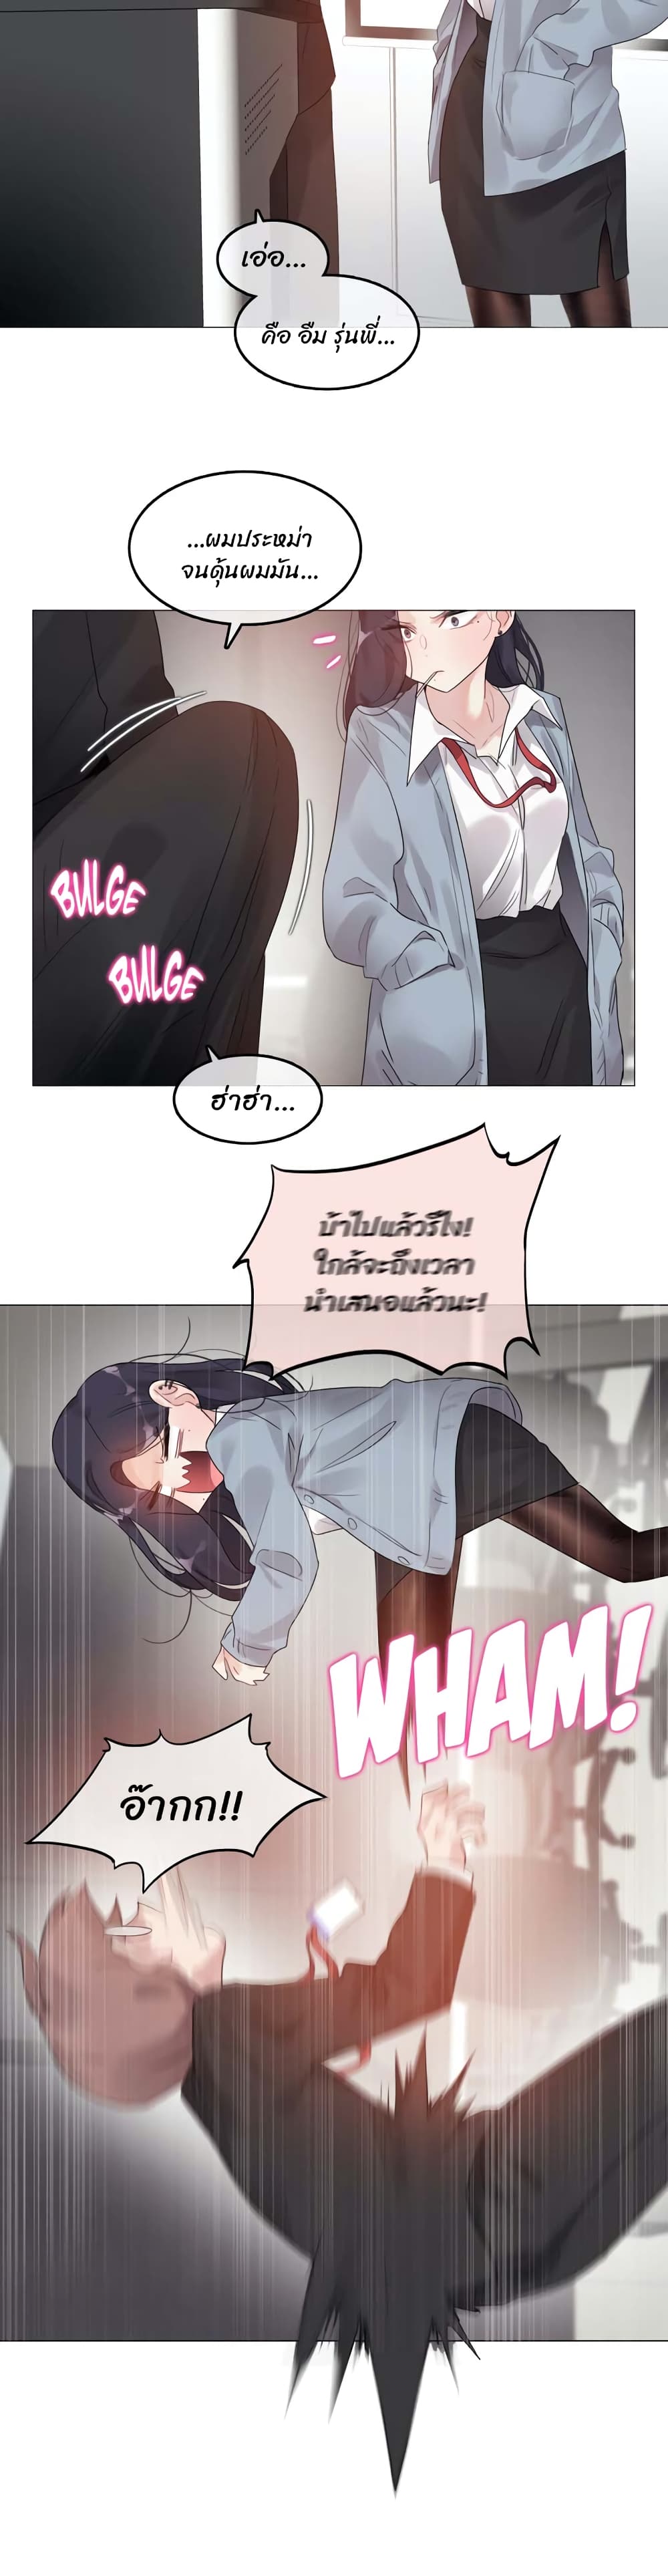 A Pervert's Daily Life 100 (3)